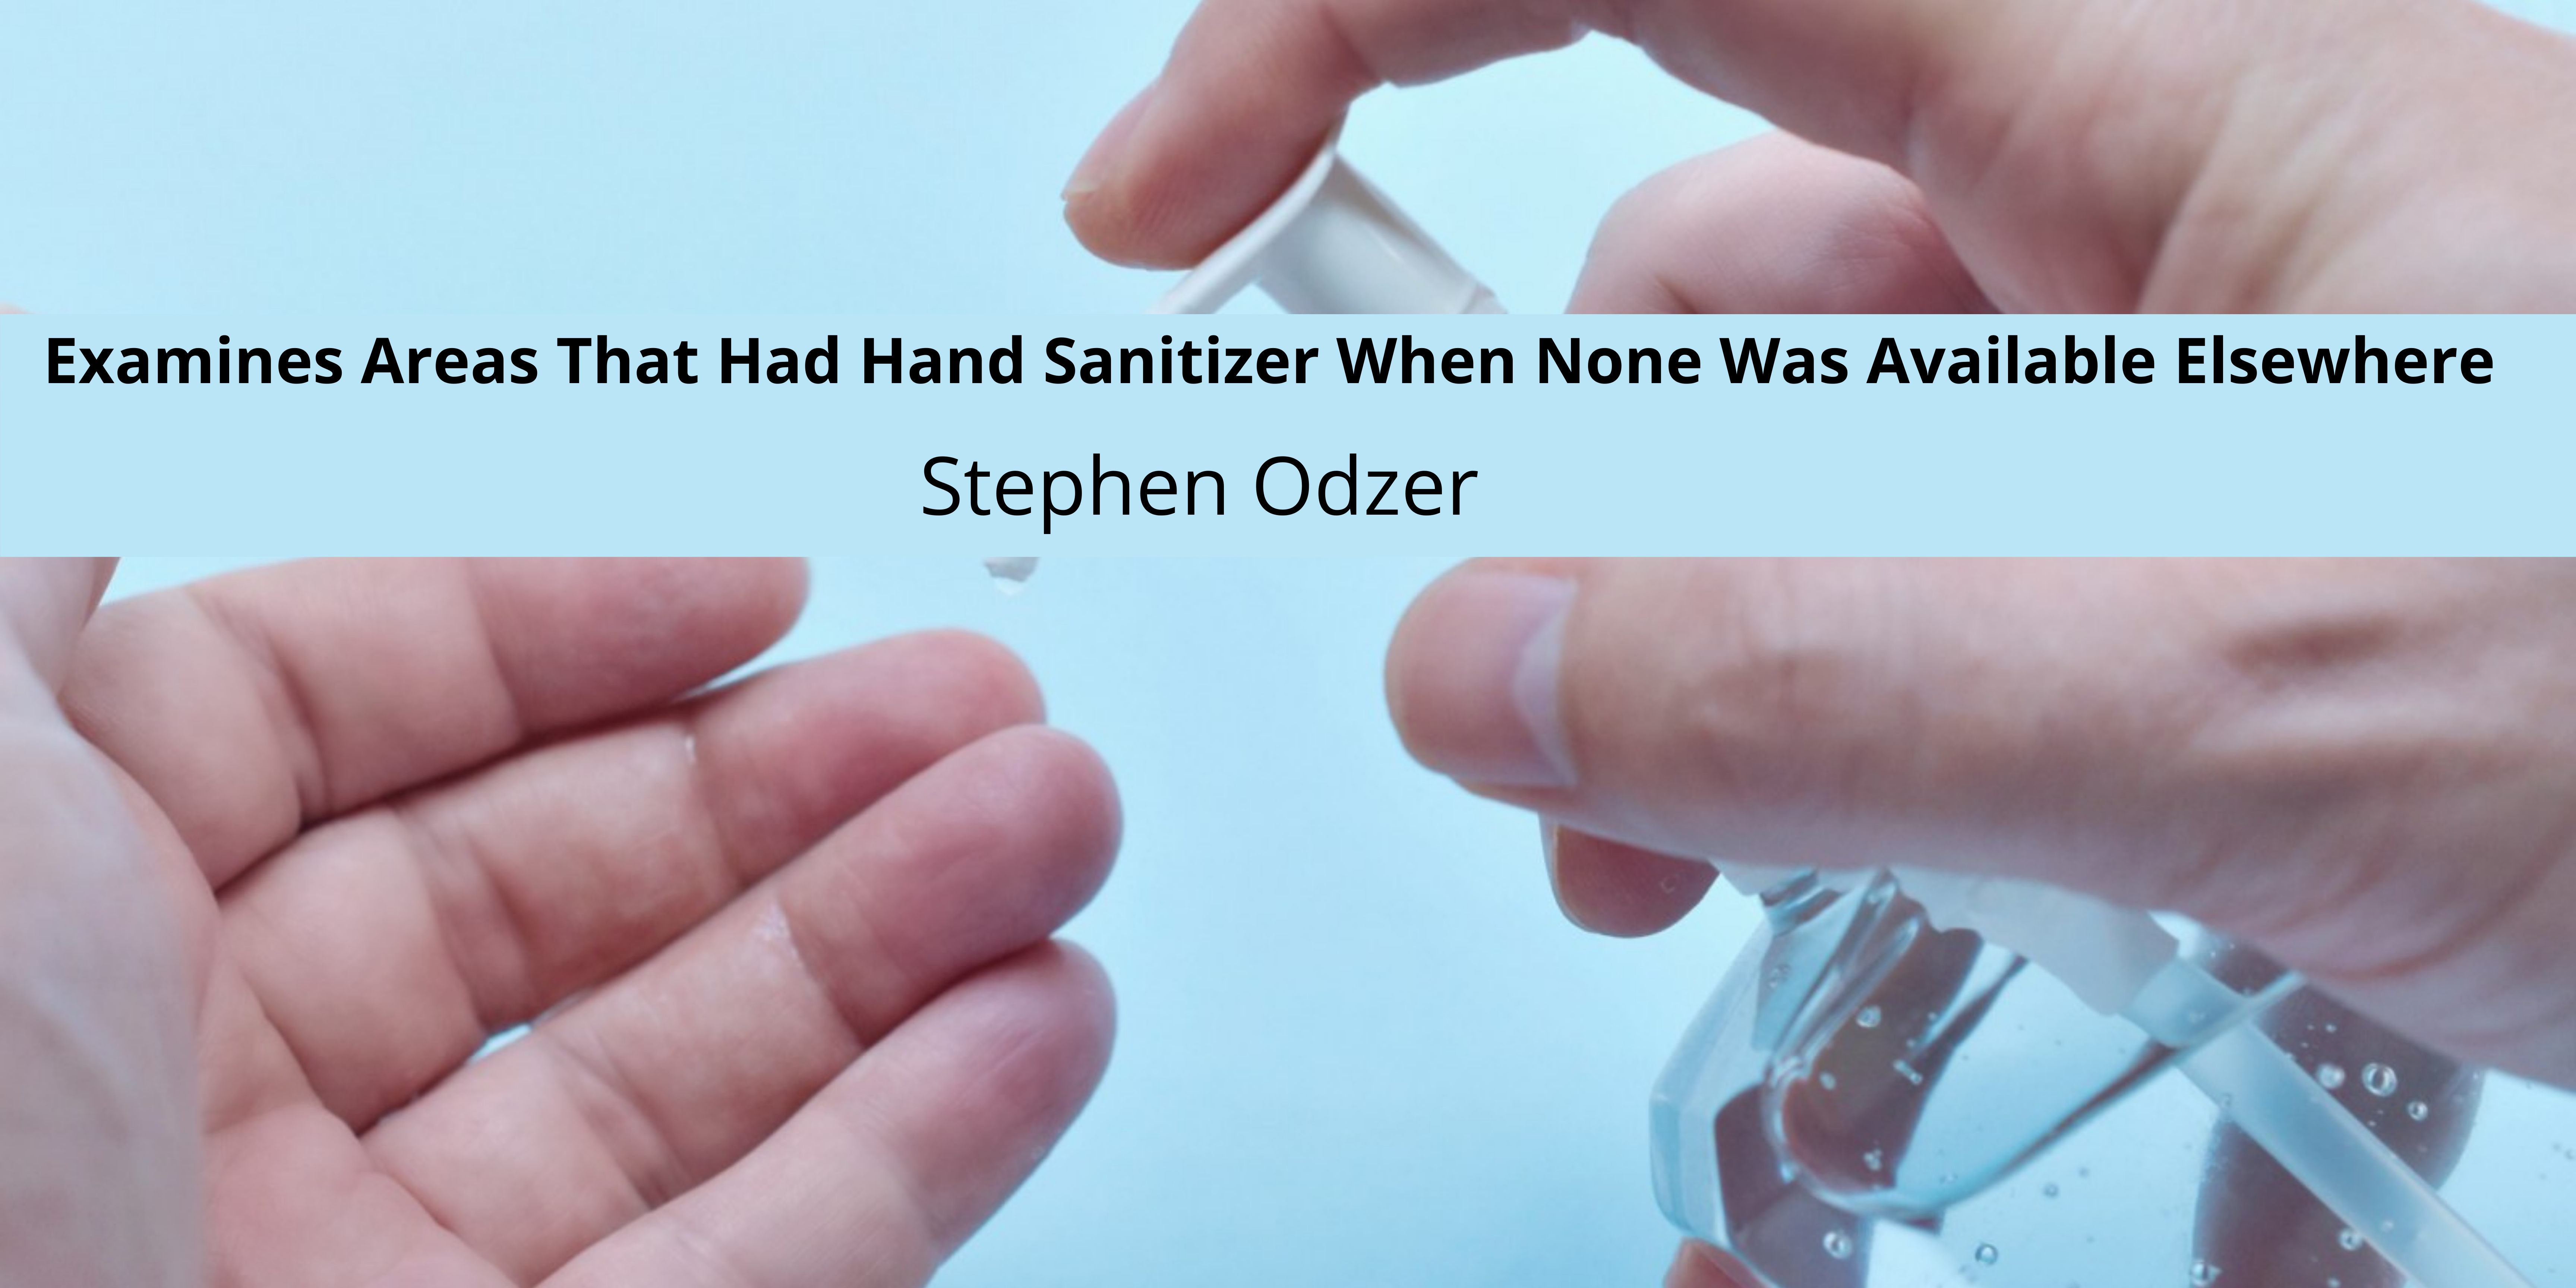 Stephen Odzer Examines Areas That Had Hand Sanitizer When None Was Available Elsewhere